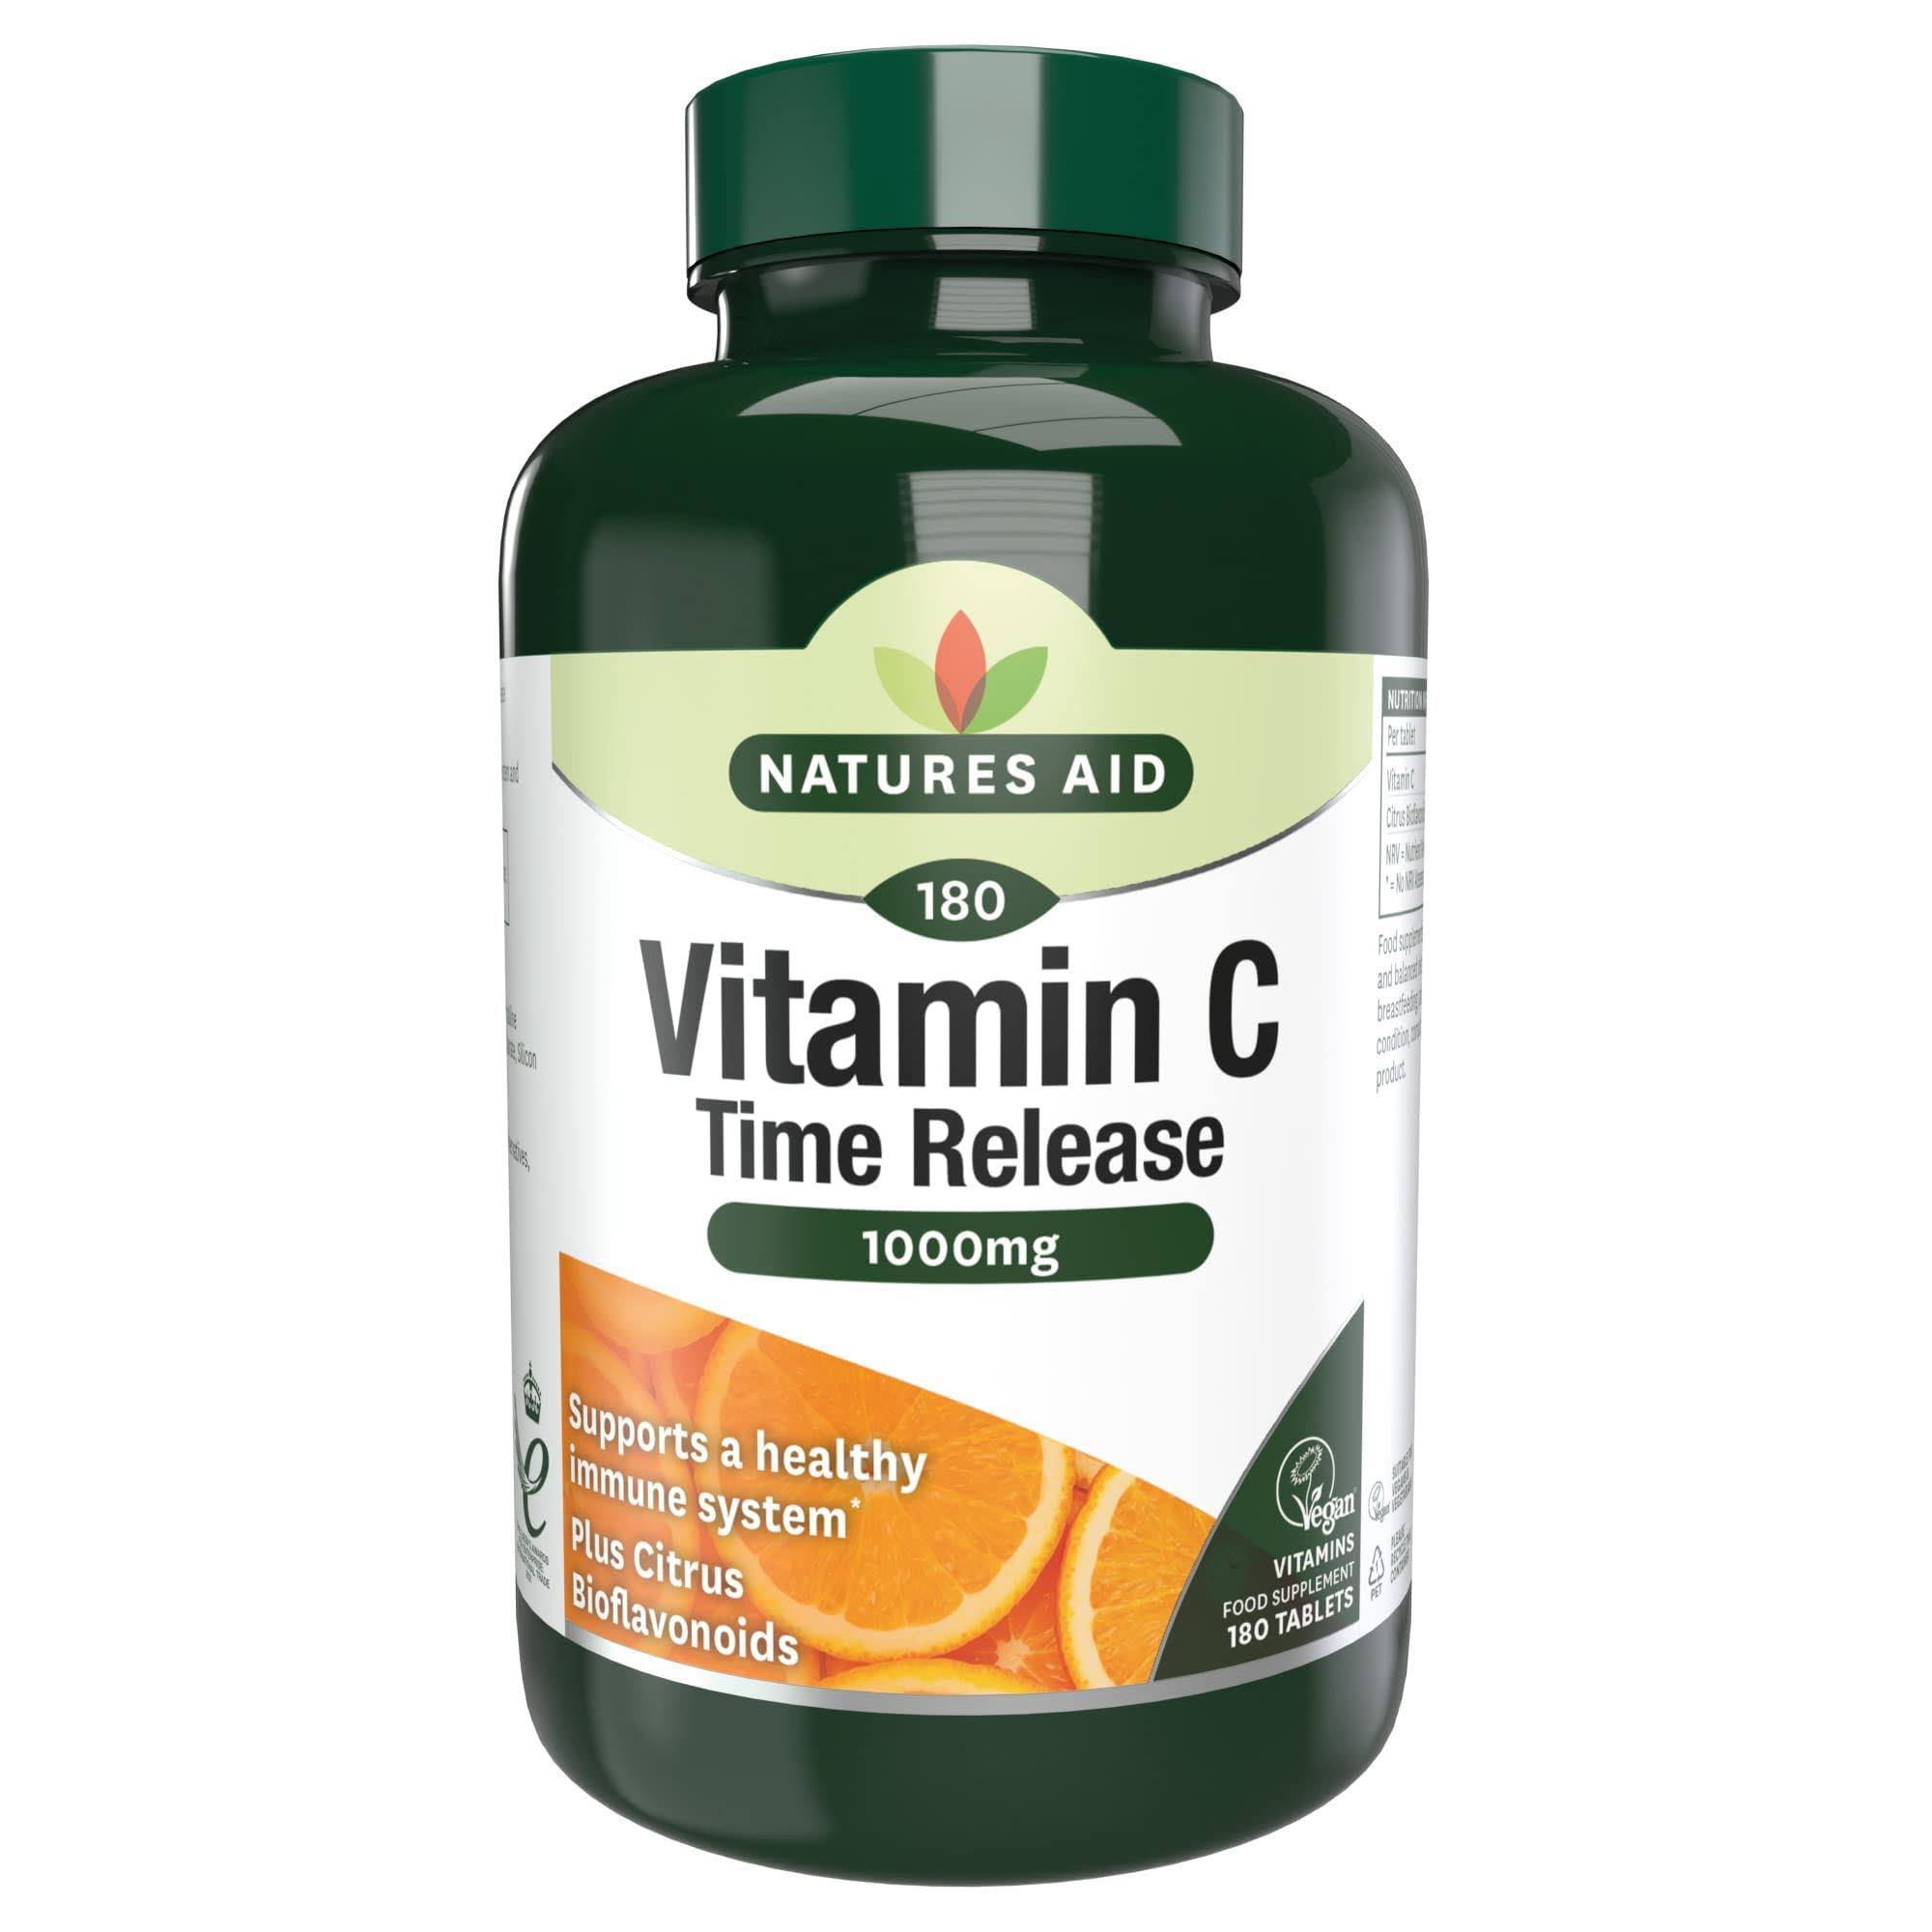 Natures Aid Time Release Vitamin C - 180 Tablets